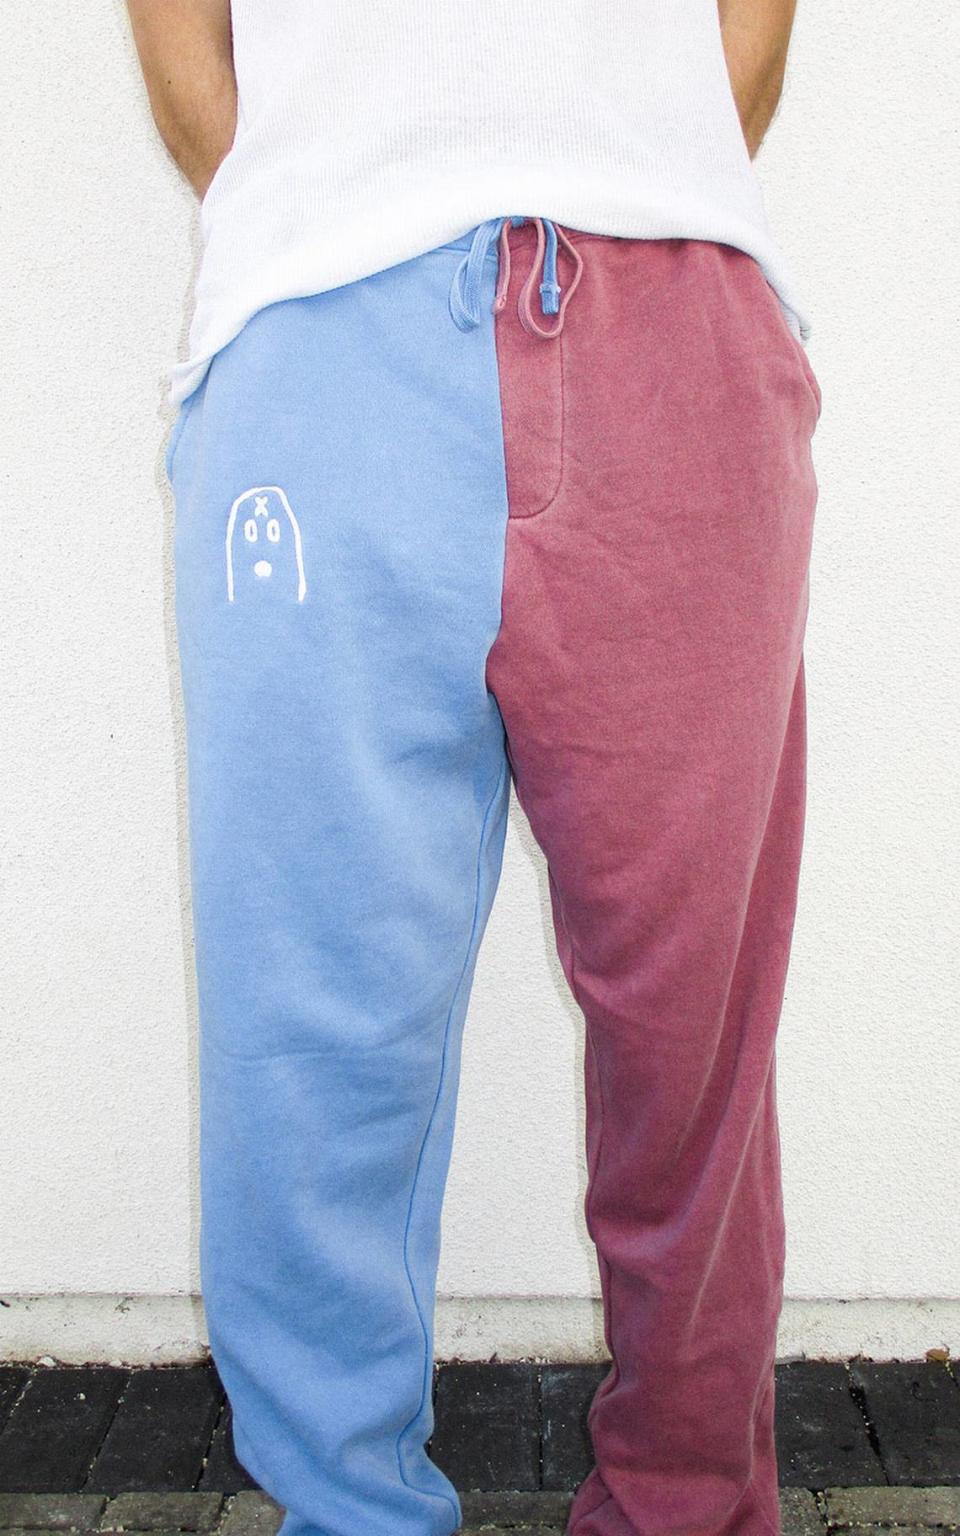 The “Throwback” split sweatpants are from Unxpectd’s recent April Collection.